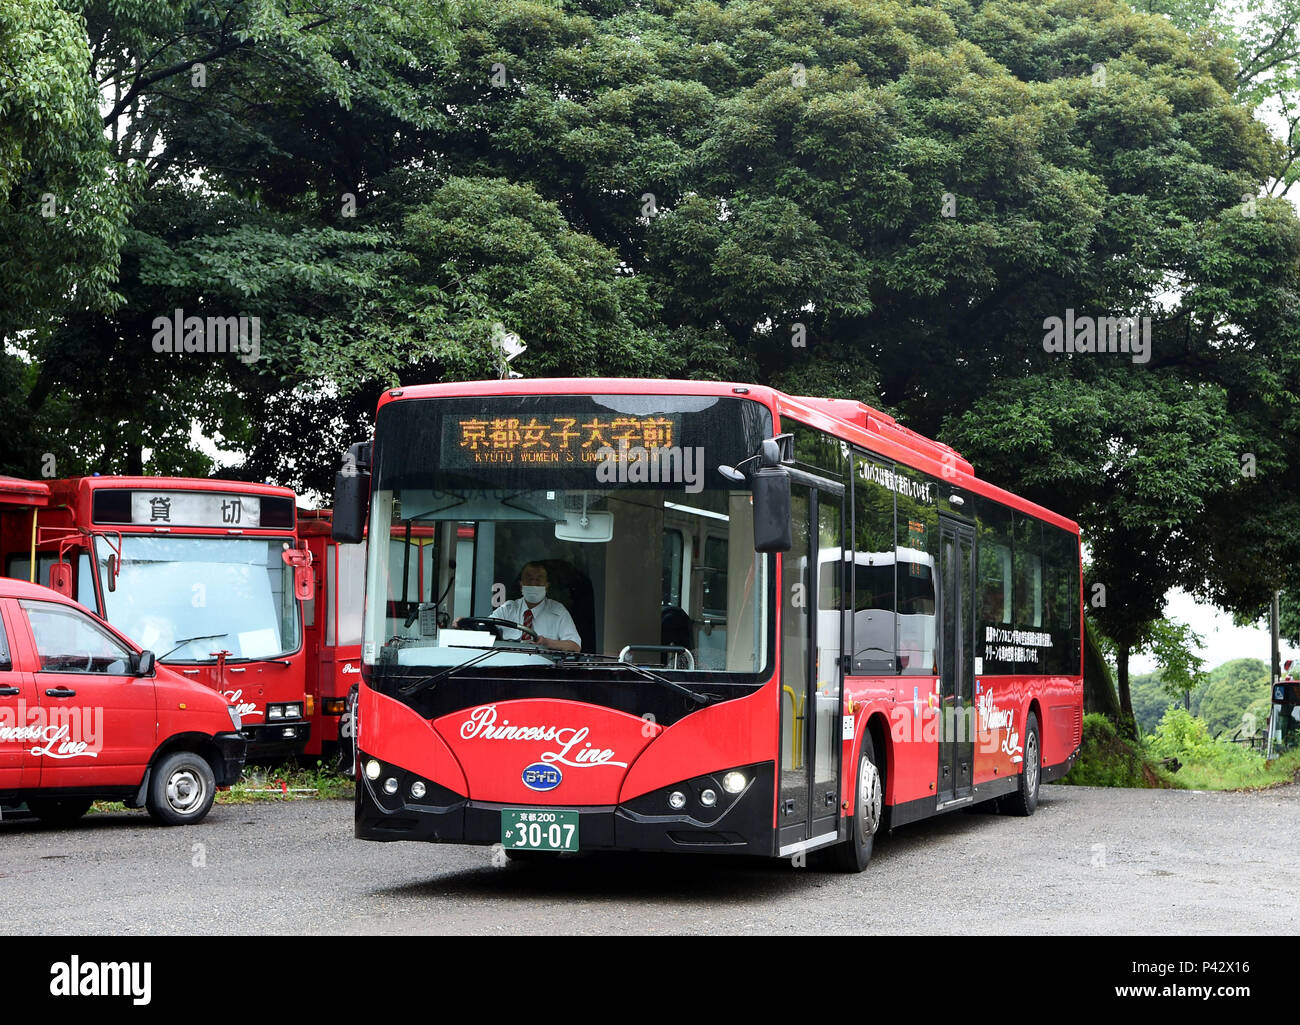 Kyoto, Japan. 20th June, 2018. A BYD electric bus arrives at the Kyoto Women's University in Kyoto, Japan, June 20, 2018. Japanese company Princess Line bought five electric buses from Chinese automaker BYD in 2015 and two more in 2017. The seven buses have now travelled some 370 thousand kilometers, cutting costs for their owner and reducing emissions for the city. Credit: Ma Ping/Xinhua/Alamy Live News Stock Photo